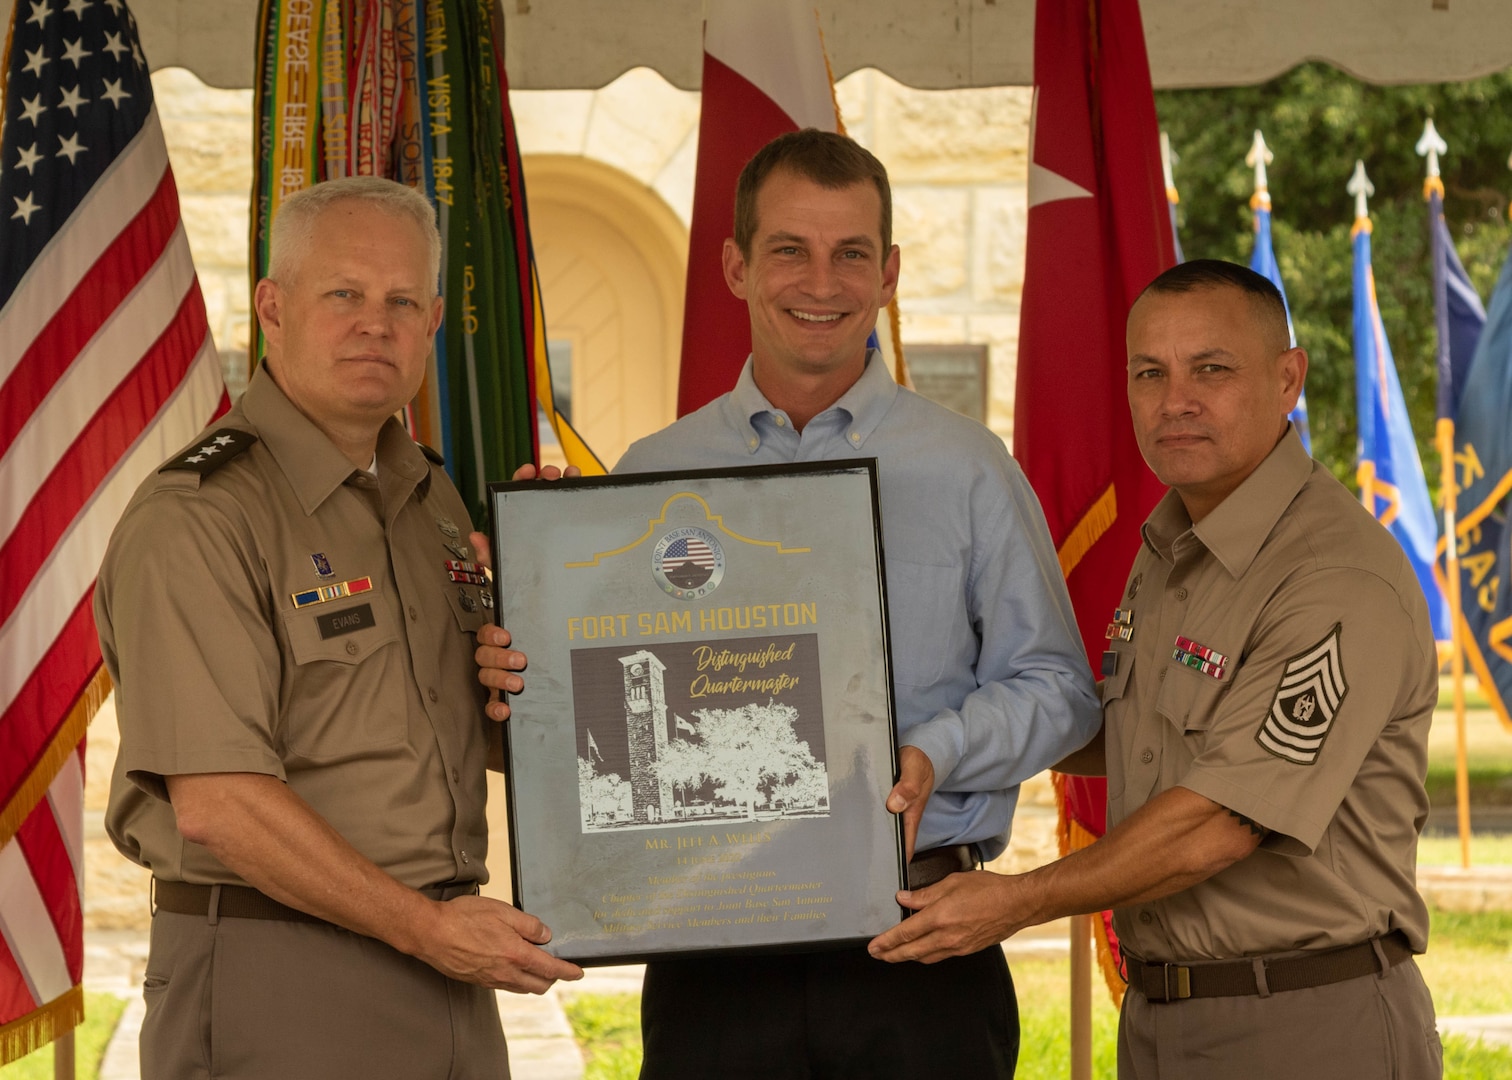 U.S. Army Lt. Gen. John R. Evans, commanding general of Army North, and Command Sgt. Maj. Phil K. Barretto, senior enlisted advisor of Army North, presents Jeff Wells with a plaque  inducting him into the Distinguished Quartermasters during the Army’s 247th birthday celebration, held at Joint Base San Antonio-Fort Sam Houston, Texas, June 14, 2022. Distinguished Quartermasters greatly reflect exceptional contribution to the Army mission through their tireless support to military programs and the San Antonio community. The Army’s annual birthday celebration highlights total force history and tradition, and commemorates the continuous commitment to defending America 24/7. (U.S. Army Photo by Spc. Andrea Kent)